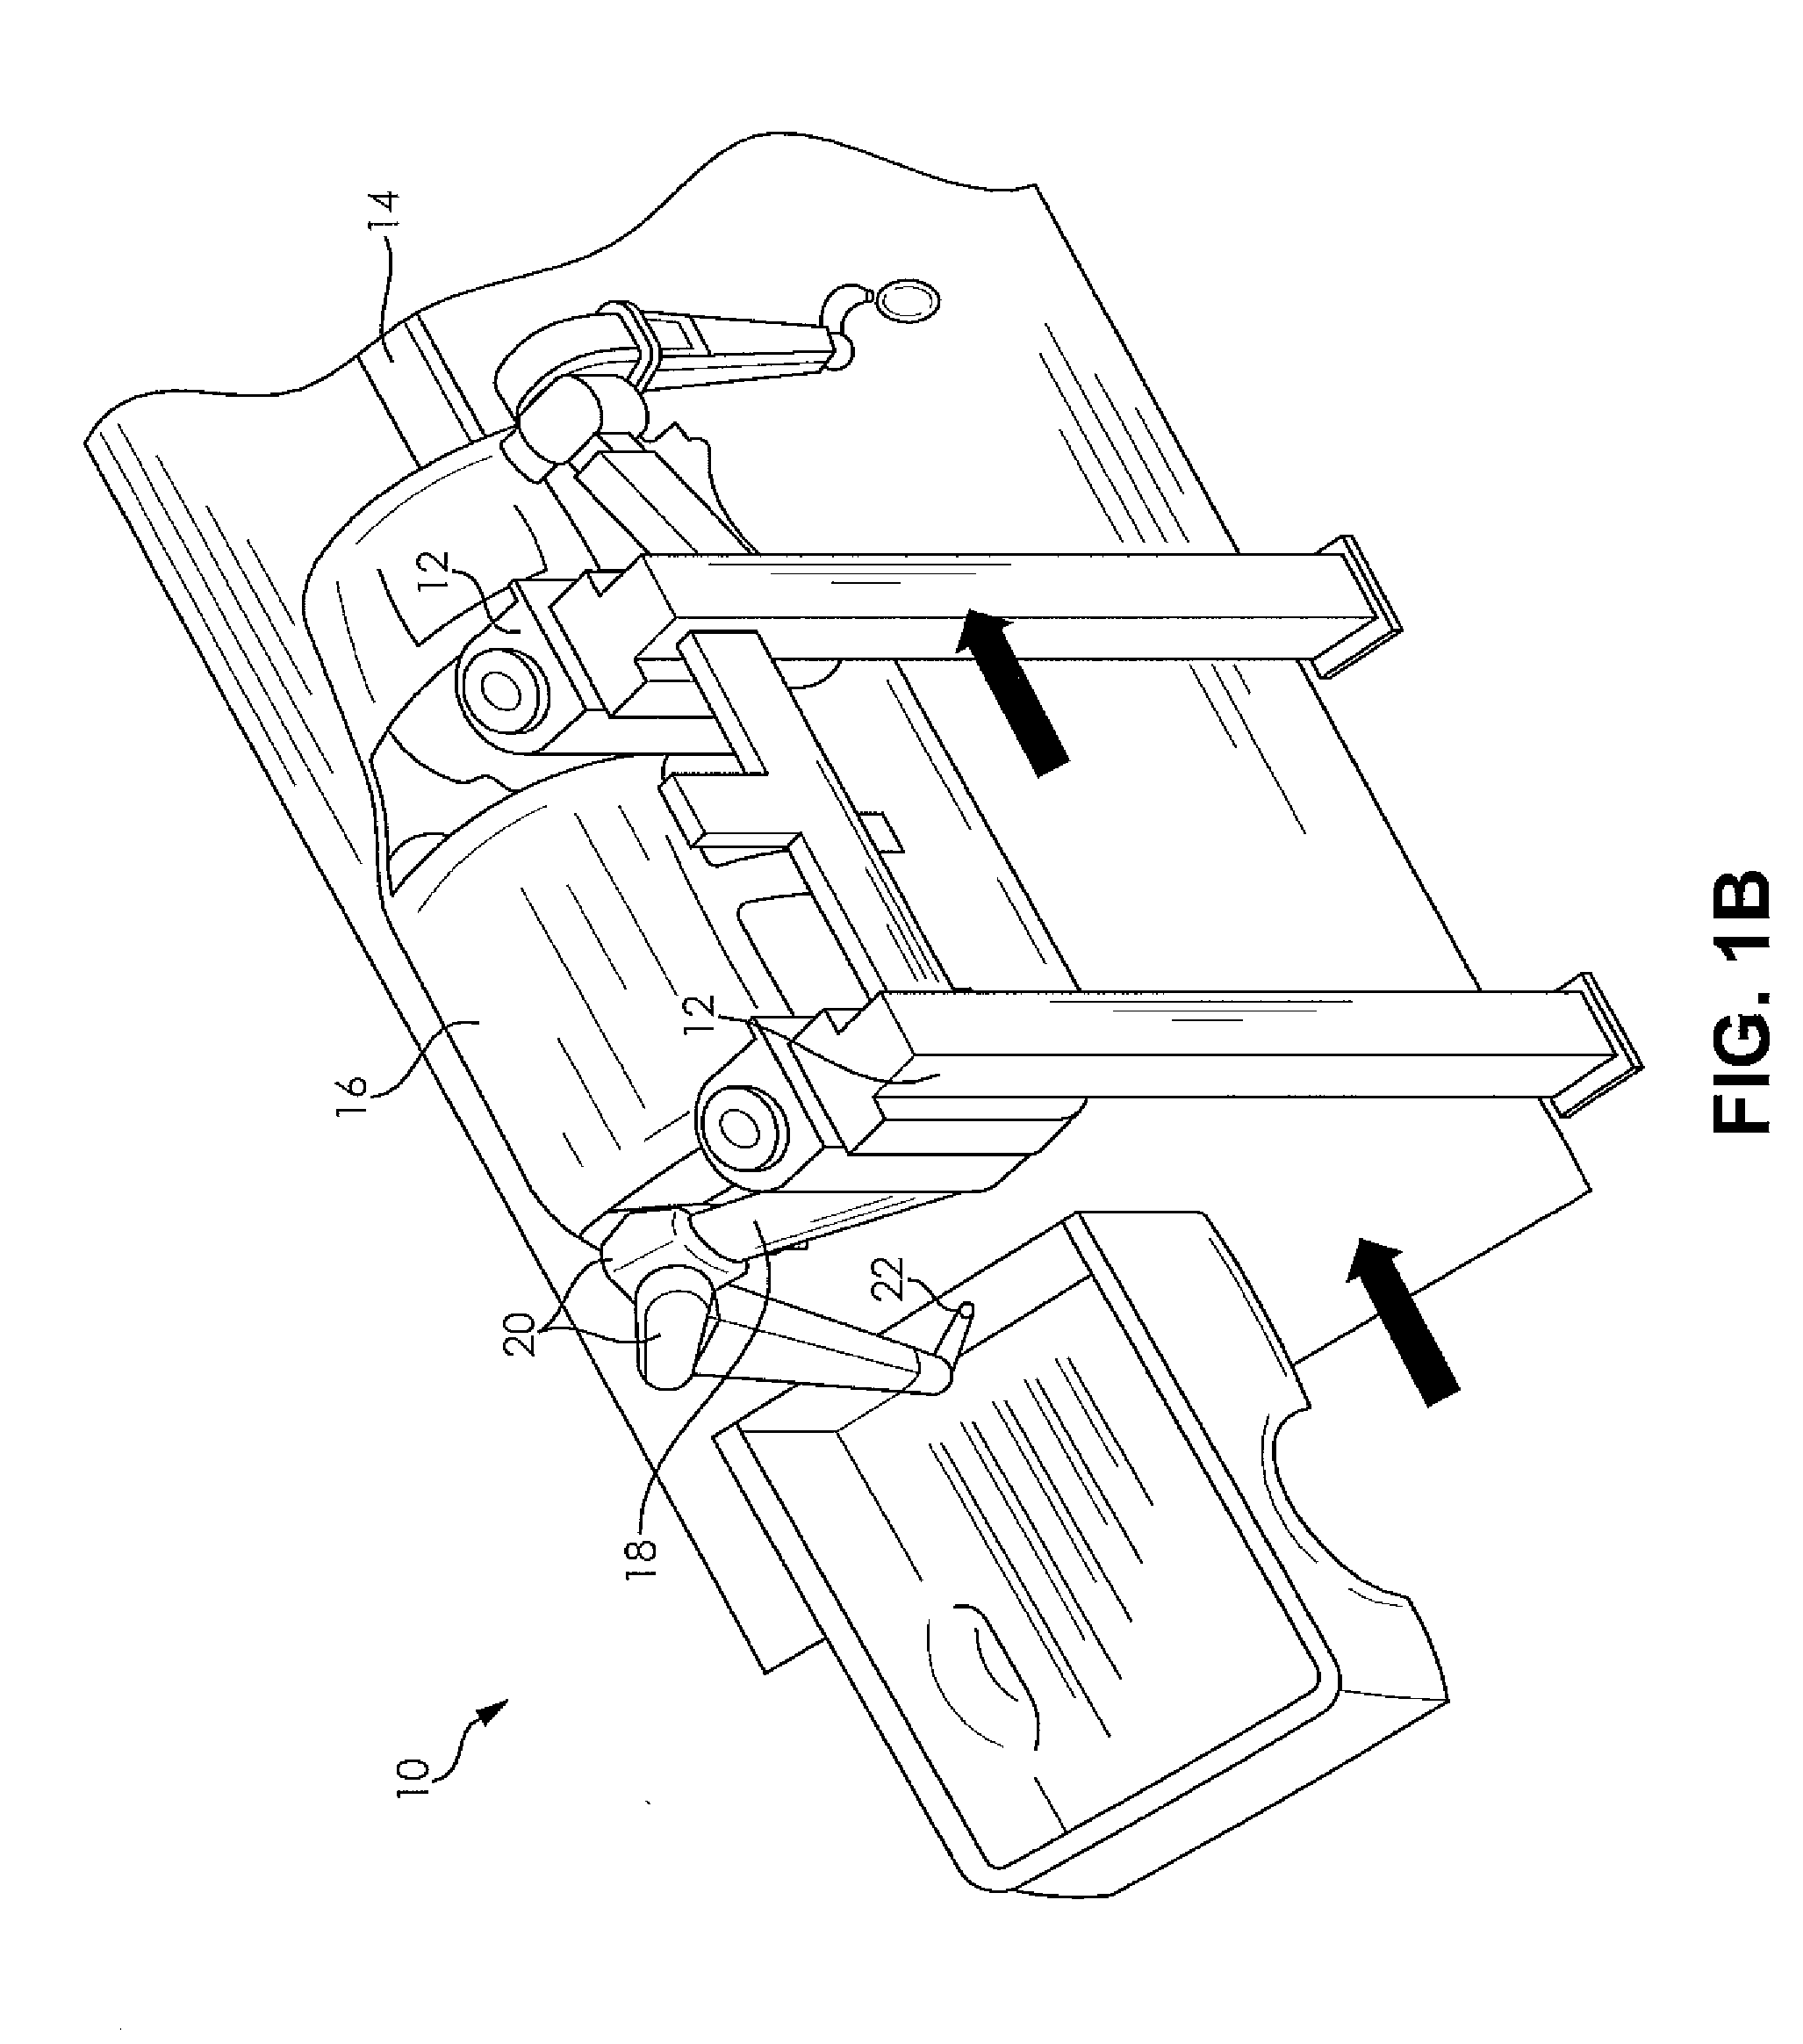 System and method for enhancing a visualization of coordinate points within a robot's working envelope